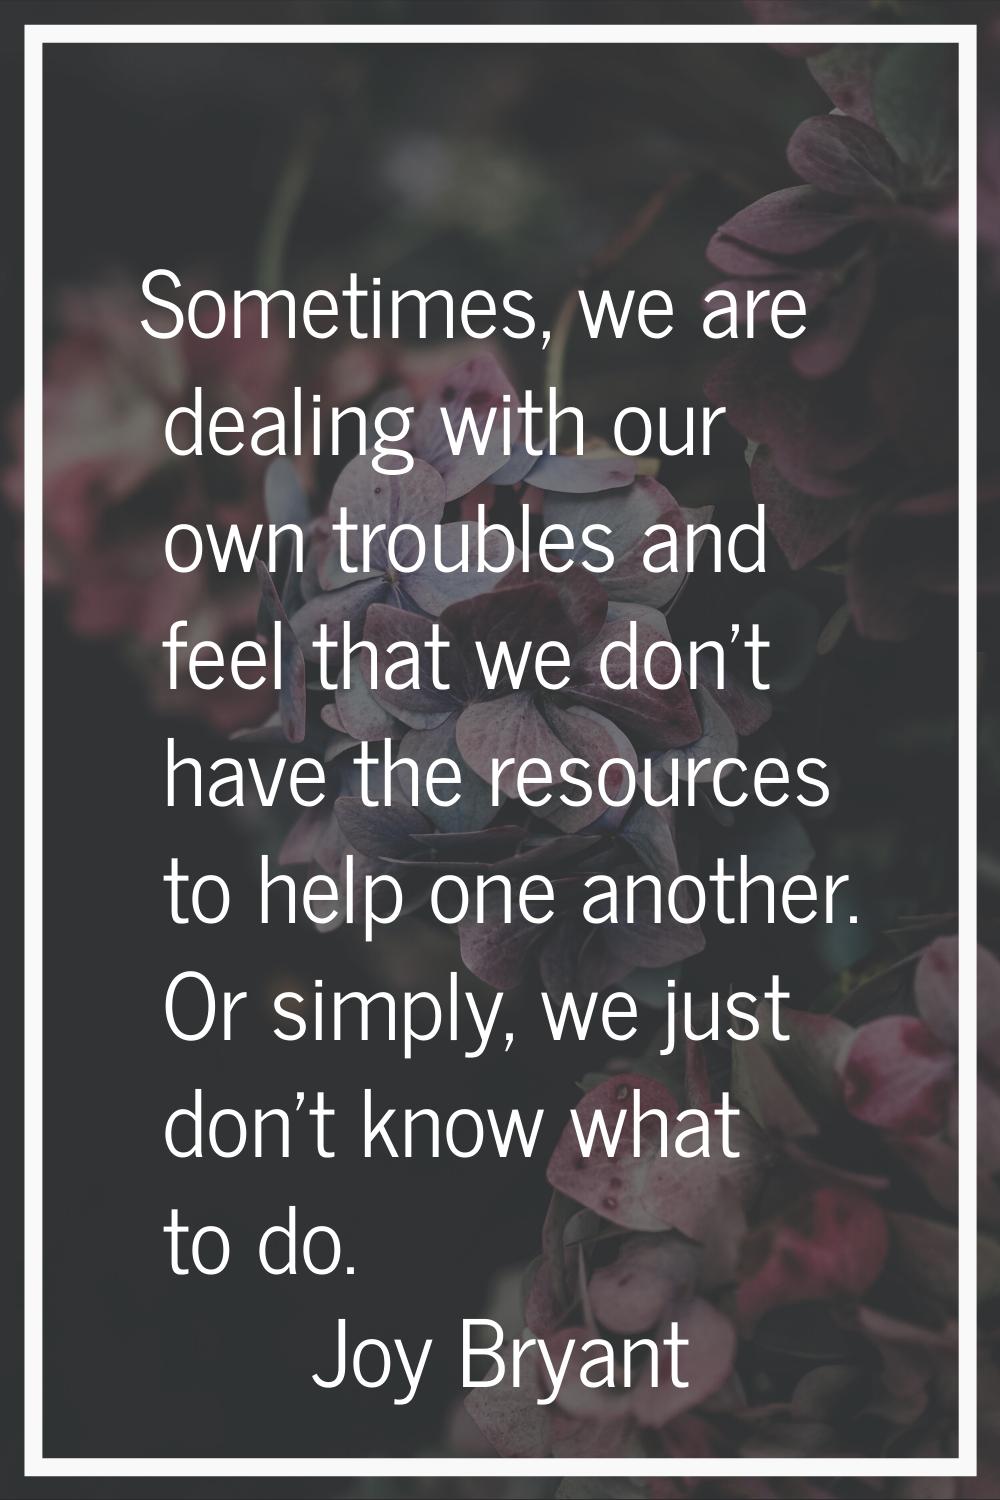 Sometimes, we are dealing with our own troubles and feel that we don't have the resources to help o